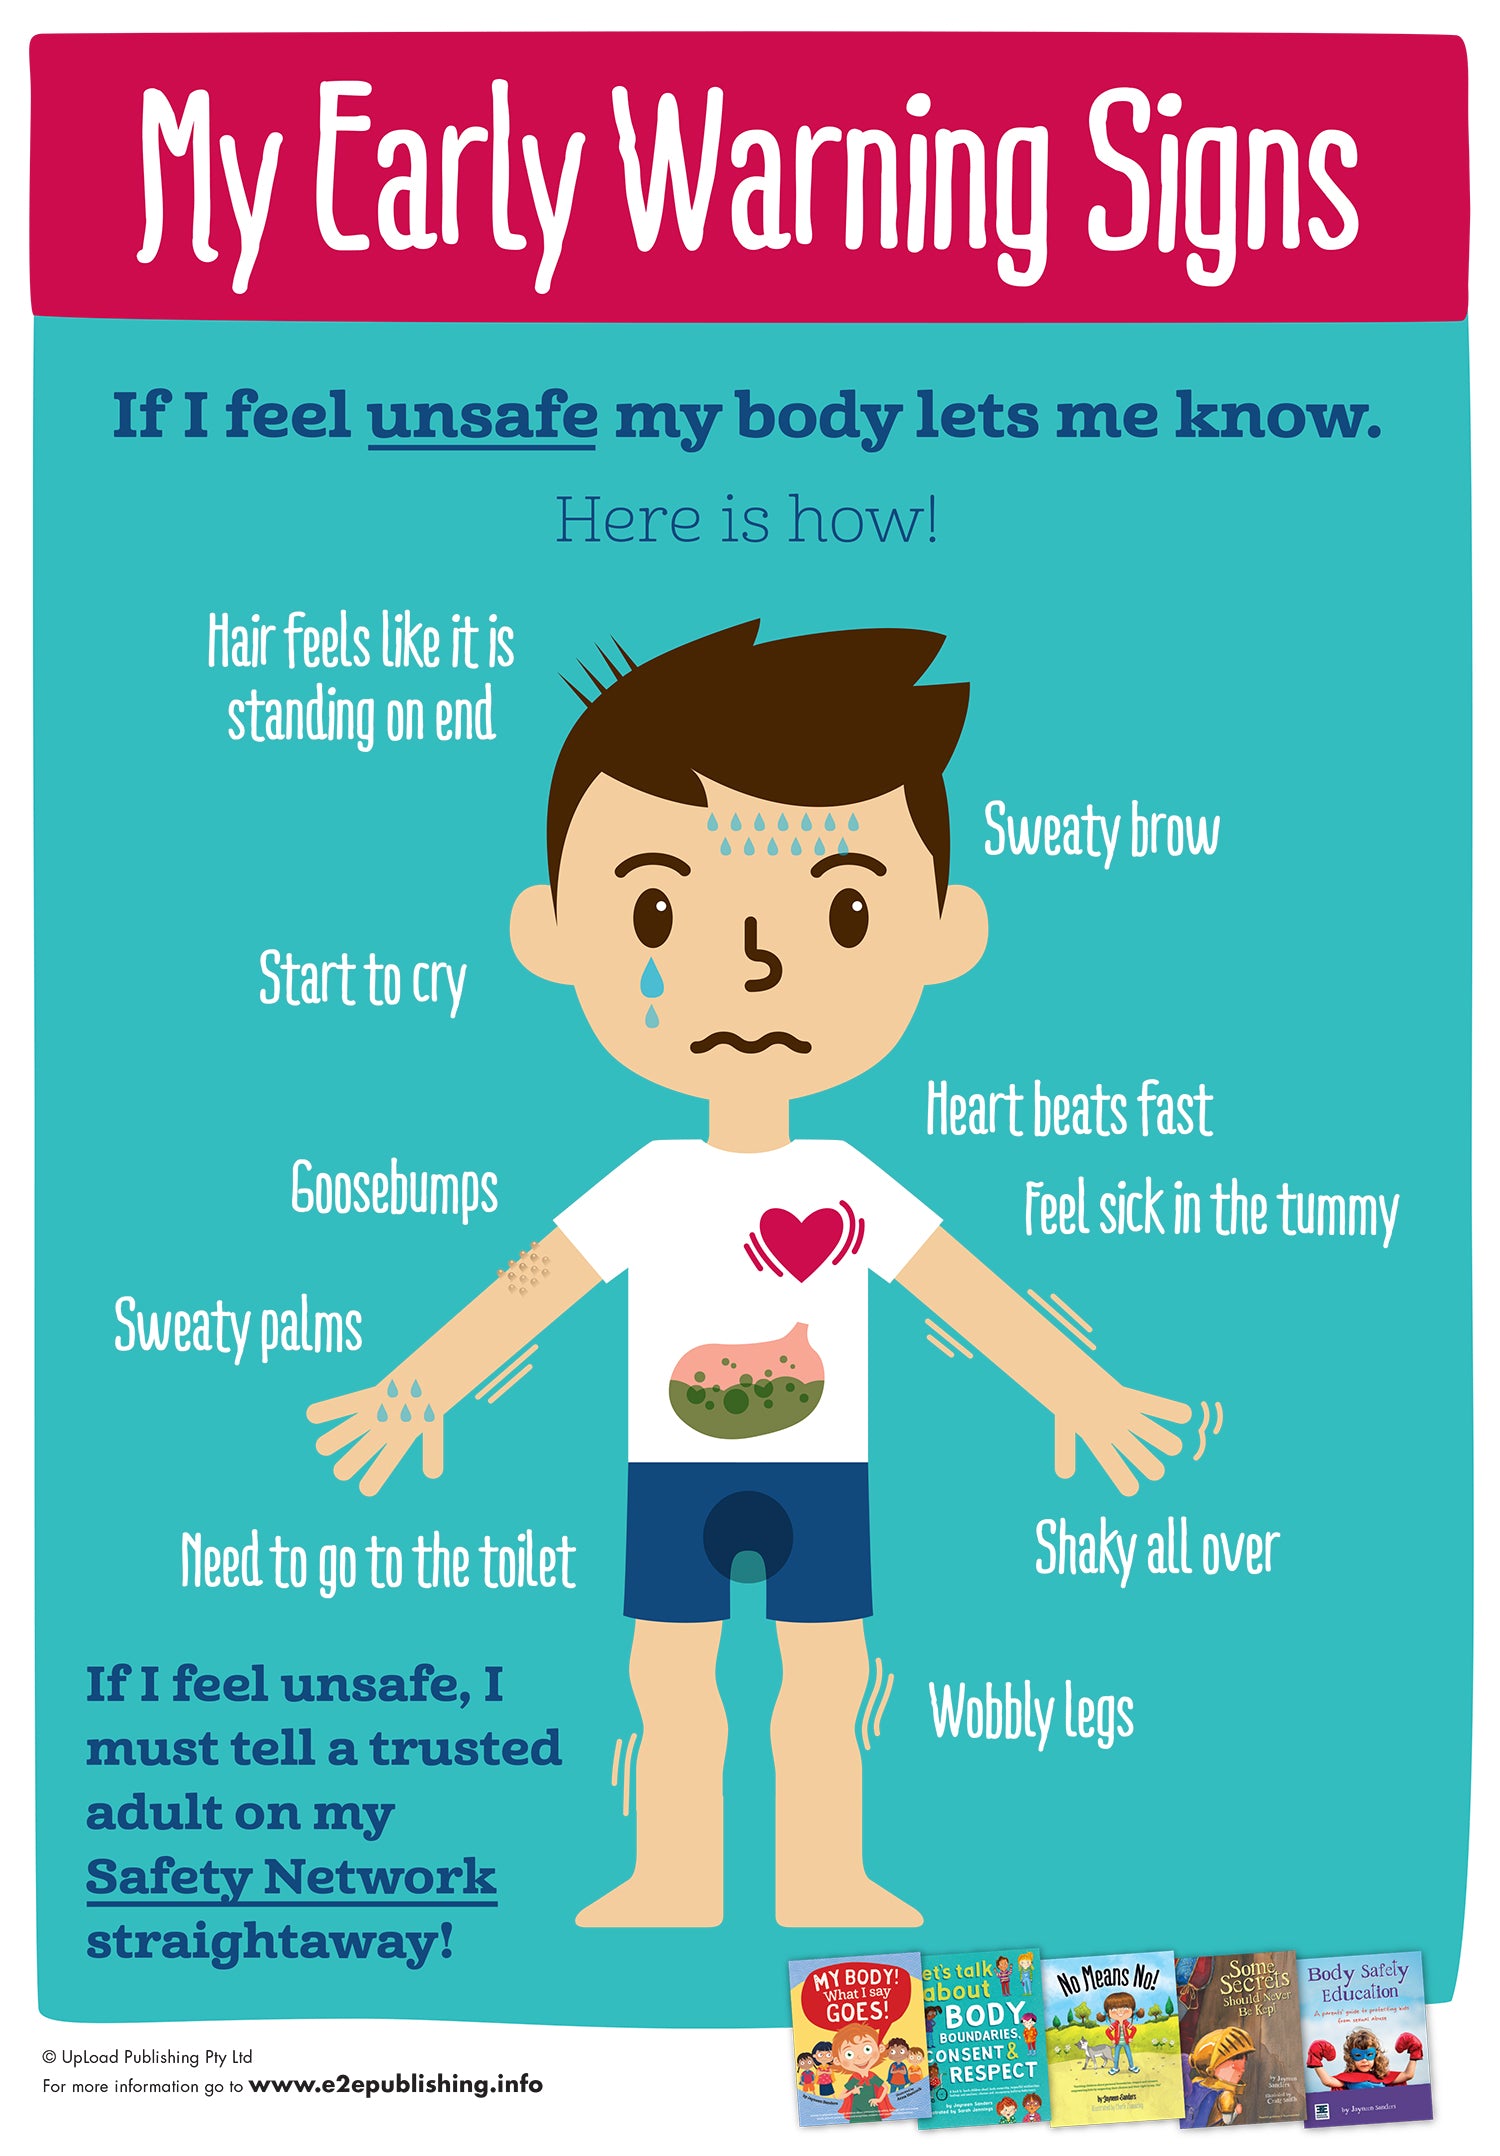 A poster for children titled 'My Early Warning Signs', which shows how the body lets you know you feel unsafe.